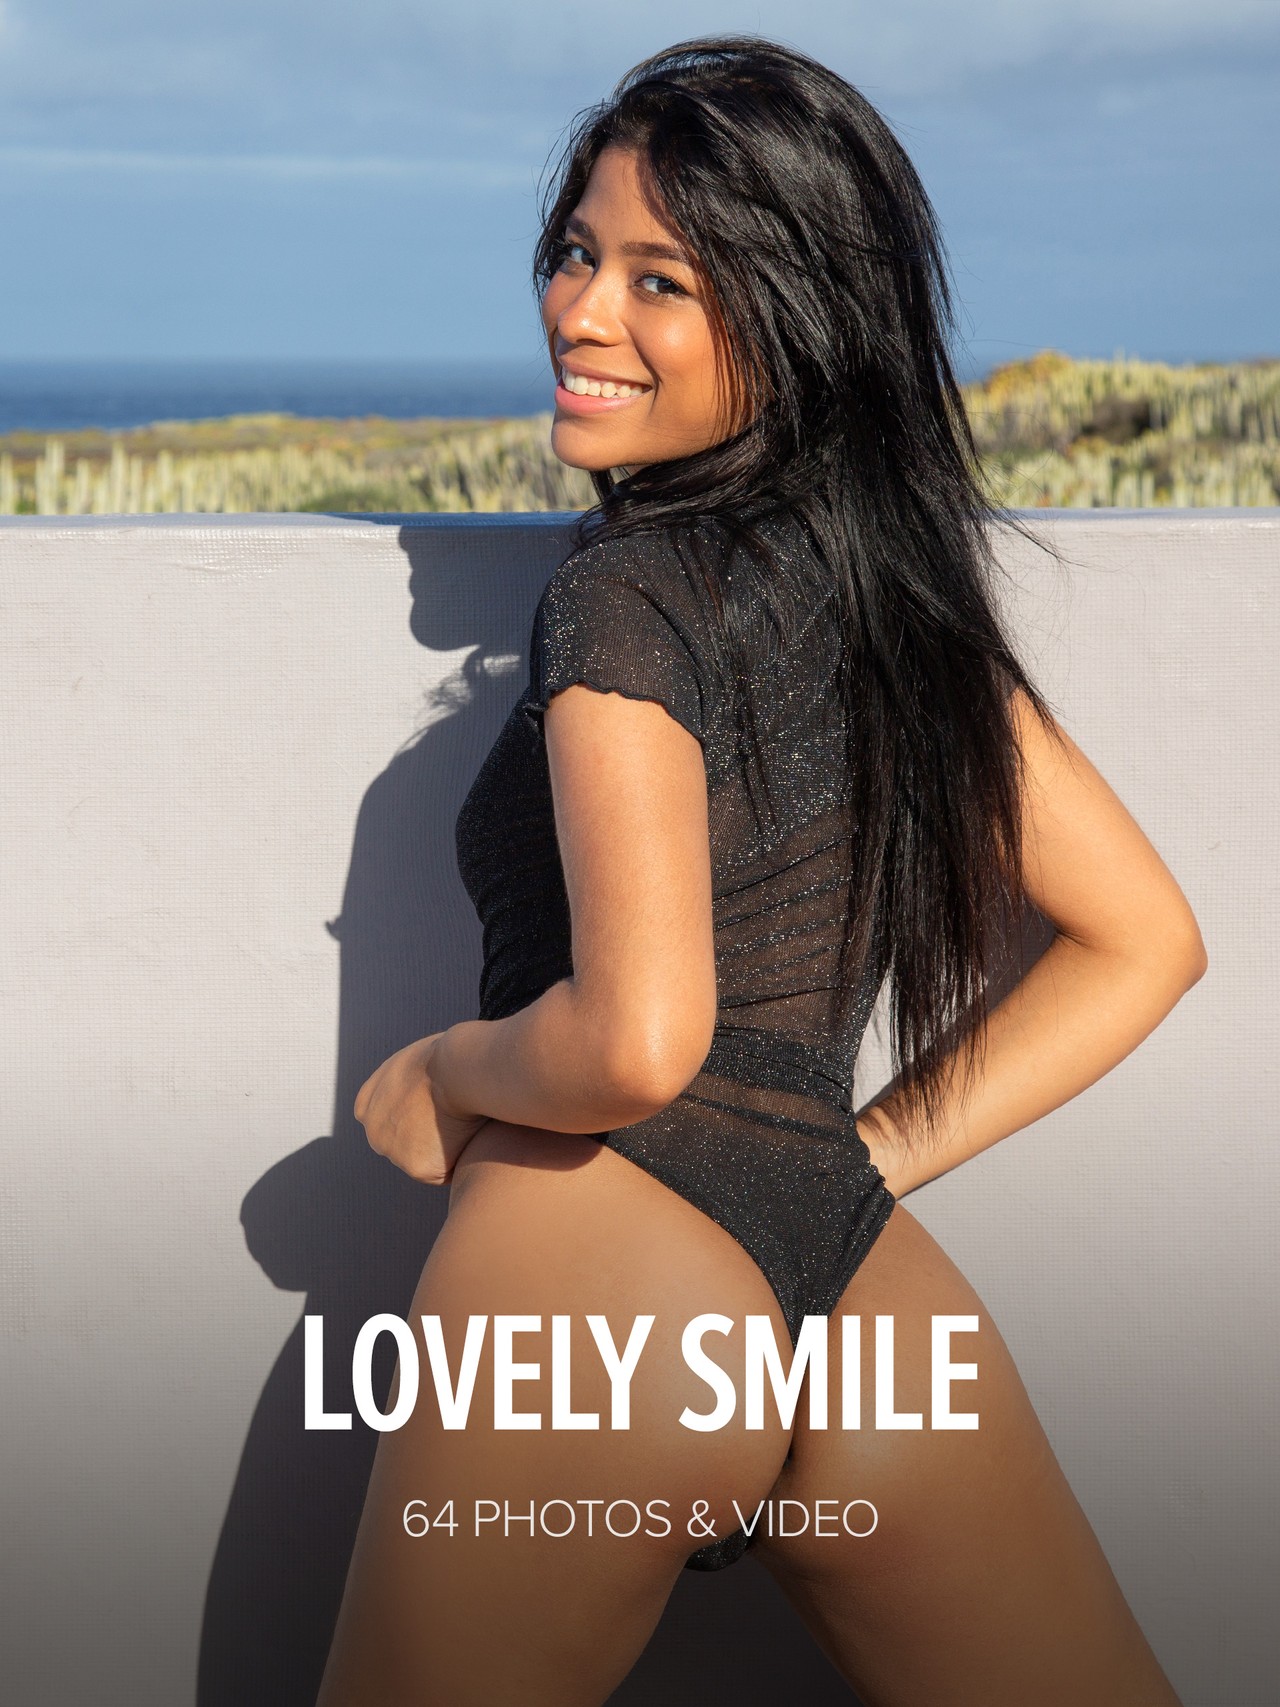 Gorgeous and ever-smiling Karin is showing off every inch of her gorgeously firm body on a beautiful location in the Canary Islands.